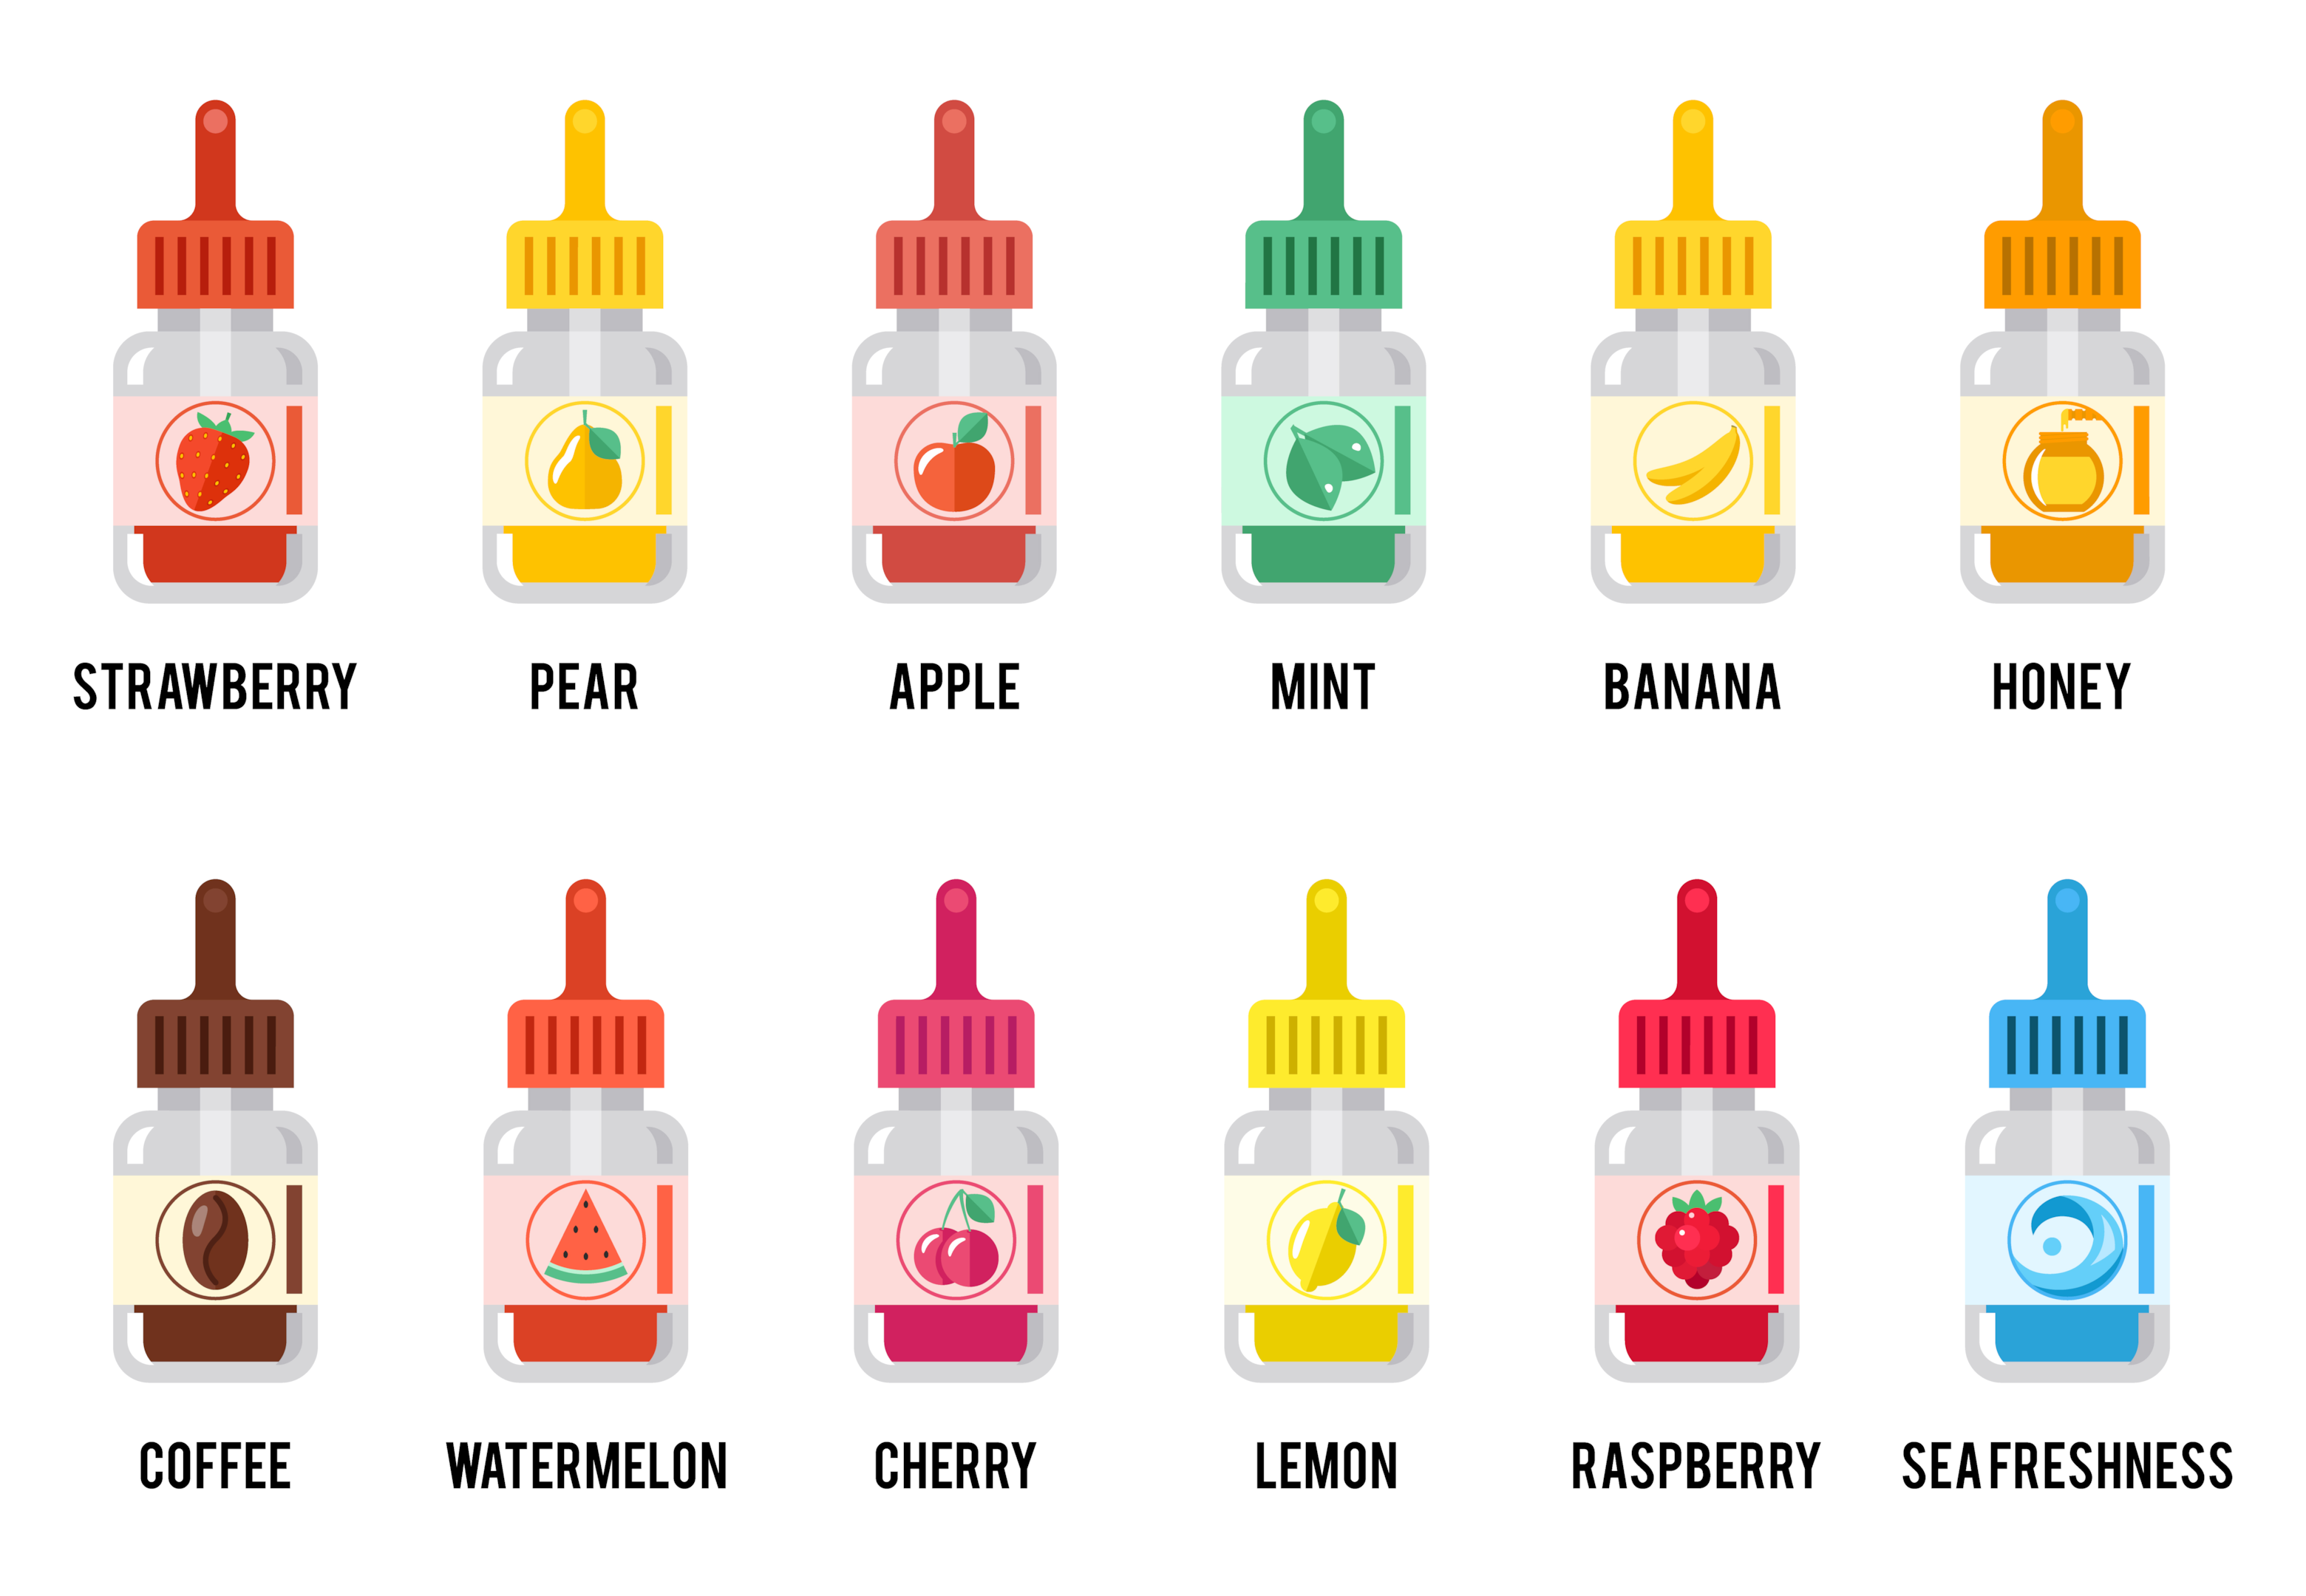 Commercial vaping juices are available in various formulations and flavours.